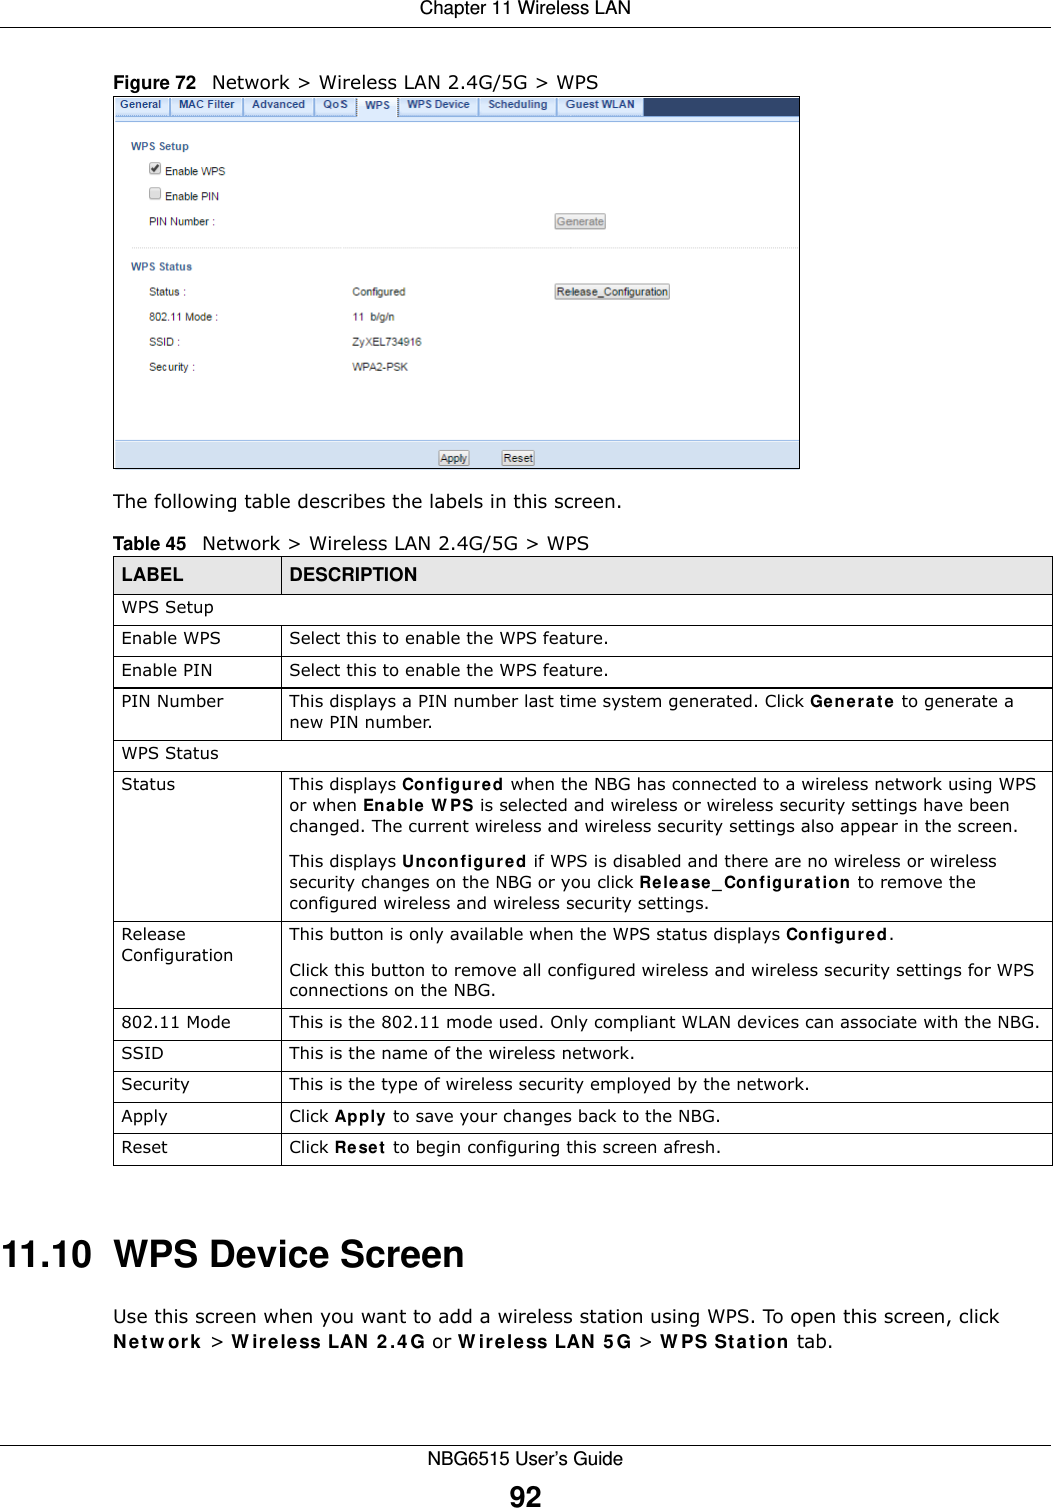 Chapter 11 Wireless LANNBG6515 User’s Guide92Figure 72   Network &gt; Wireless LAN 2.4G/5G &gt; WPSThe following table describes the labels in this screen.11.10  WPS Device ScreenUse this screen when you want to add a wireless station using WPS. To open this screen, click Network &gt; Wireless LAN 2.4G or Wireless LAN 5G &gt; WPS Station tab.Table 45   Network &gt; Wireless LAN 2.4G/5G &gt; WPSLABEL DESCRIPTIONWPS SetupEnable WPS Select this to enable the WPS feature.Enable PIN Select this to enable the WPS feature.PIN Number This displays a PIN number last time system generated. Click Generate to generate a new PIN number.WPS StatusStatus This displays Configured when the NBG has connected to a wireless network using WPS or when Enable WPS is selected and wireless or wireless security settings have been changed. The current wireless and wireless security settings also appear in the screen.This displays Unconfigured if WPS is disabled and there are no wireless or wireless security changes on the NBG or you click Release_Configuration to remove the configured wireless and wireless security settings.Release ConfigurationThis button is only available when the WPS status displays Configured.Click this button to remove all configured wireless and wireless security settings for WPS connections on the NBG.802.11 Mode This is the 802.11 mode used. Only compliant WLAN devices can associate with the NBG.SSID This is the name of the wireless network.Security This is the type of wireless security employed by the network.Apply Click Apply to save your changes back to the NBG.Reset Click Reset to begin configuring this screen afresh.